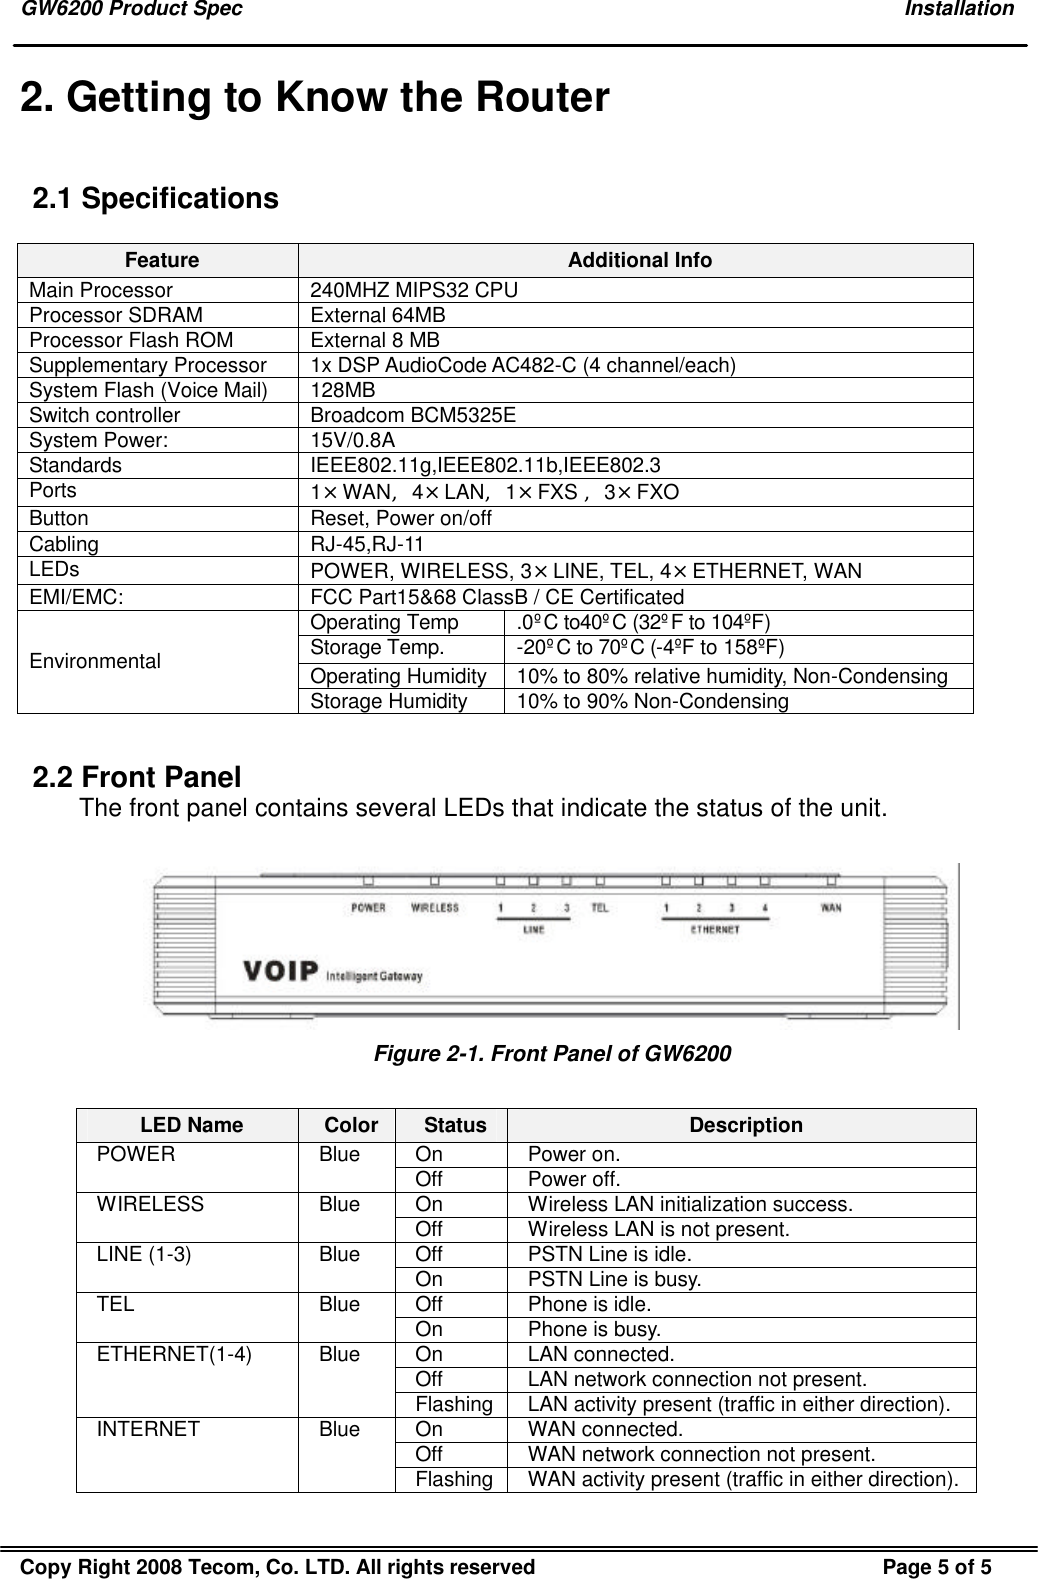 GW6200 Product Spec    Installation Copy Right 2008 Tecom, Co. LTD. All rights reserved Page 5 of 5  2. Getting to Know the Router 2.1 Specifications  Feature Additional Info Main Processor 240MHZ MIPS32 CPU Processor SDRAM External 64MB Processor Flash ROM External 8 MB Supplementary Processor 1x DSP AudioCode AC482-C (4 channel/each) System Flash (Voice Mail) 128MB Switch controller Broadcom BCM5325E System Power: 15V/0.8A Standards IEEE802.11g,IEEE802.11b,IEEE802.3 Ports 1×WAN,4×LAN,1×FXS ,3×FXO Button Reset, Power on/off Cabling RJ-45,RJ-11 LEDs POWER, WIRELESS, 3×LINE, TEL, 4×ETHERNET, WAN EMI/EMC: FCC Part15&amp;68 ClassB / CE Certificated Operating Temp .0ºC to40ºC (32ºF to 104ºF) Storage Temp.  -20ºC to 70ºC (-4ºF to 158ºF) Operating Humidity   10% to 80% relative humidity, Non-Condensing Environmental Storage Humidity  10% to 90% Non-Condensing  2.2 Front Panel The front panel contains several LEDs that indicate the status of the unit.   Figure 2-1. Front Panel of GW6200  LED Name Color Status Description On Power on. POWER Blue Off Power off. On Wireless LAN initialization success. WIRELESS Blue Off Wireless LAN is not present. Off PSTN Line is idle. LINE (1-3) Blue On PSTN Line is busy. Off Phone is idle. TEL Blue On Phone is busy. On LAN connected. Off LAN network connection not present. ETHERNET(1-4) Blue Flashing LAN activity present (traffic in either direction). On WAN connected. Off WAN network connection not present. INTERNET Blue Flashing  WAN activity present (traffic in either direction).  